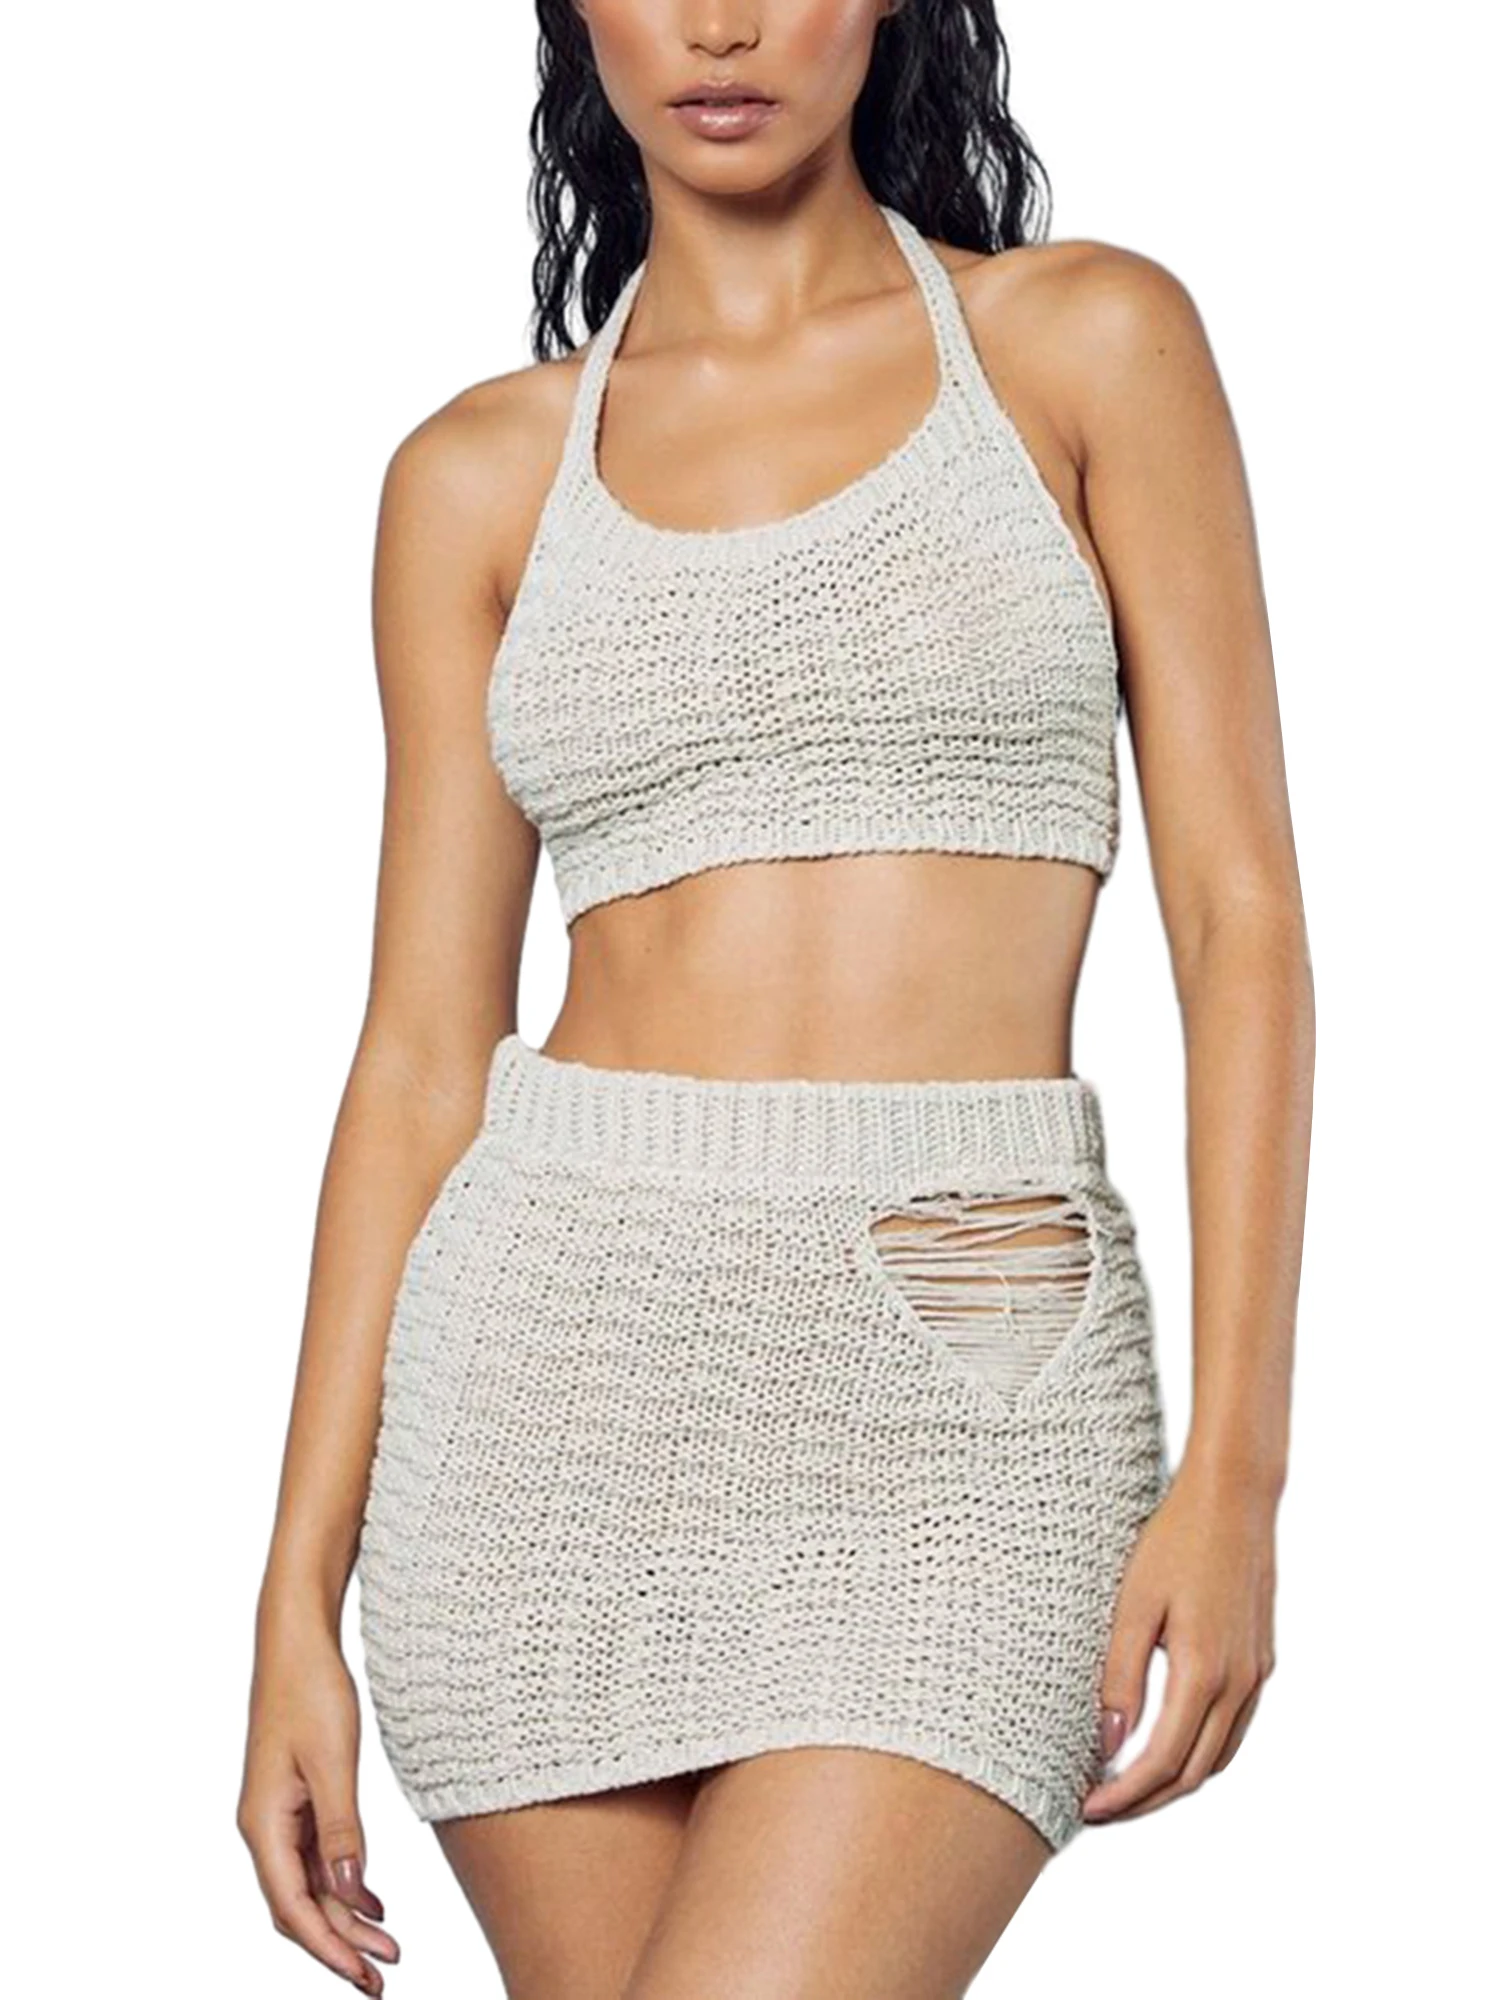 

Stylish Women s 2 Piece Crochet Knit Sets for Clubbing and Going Out - Hollow Out Beachwear with Cute Matching Outfits -